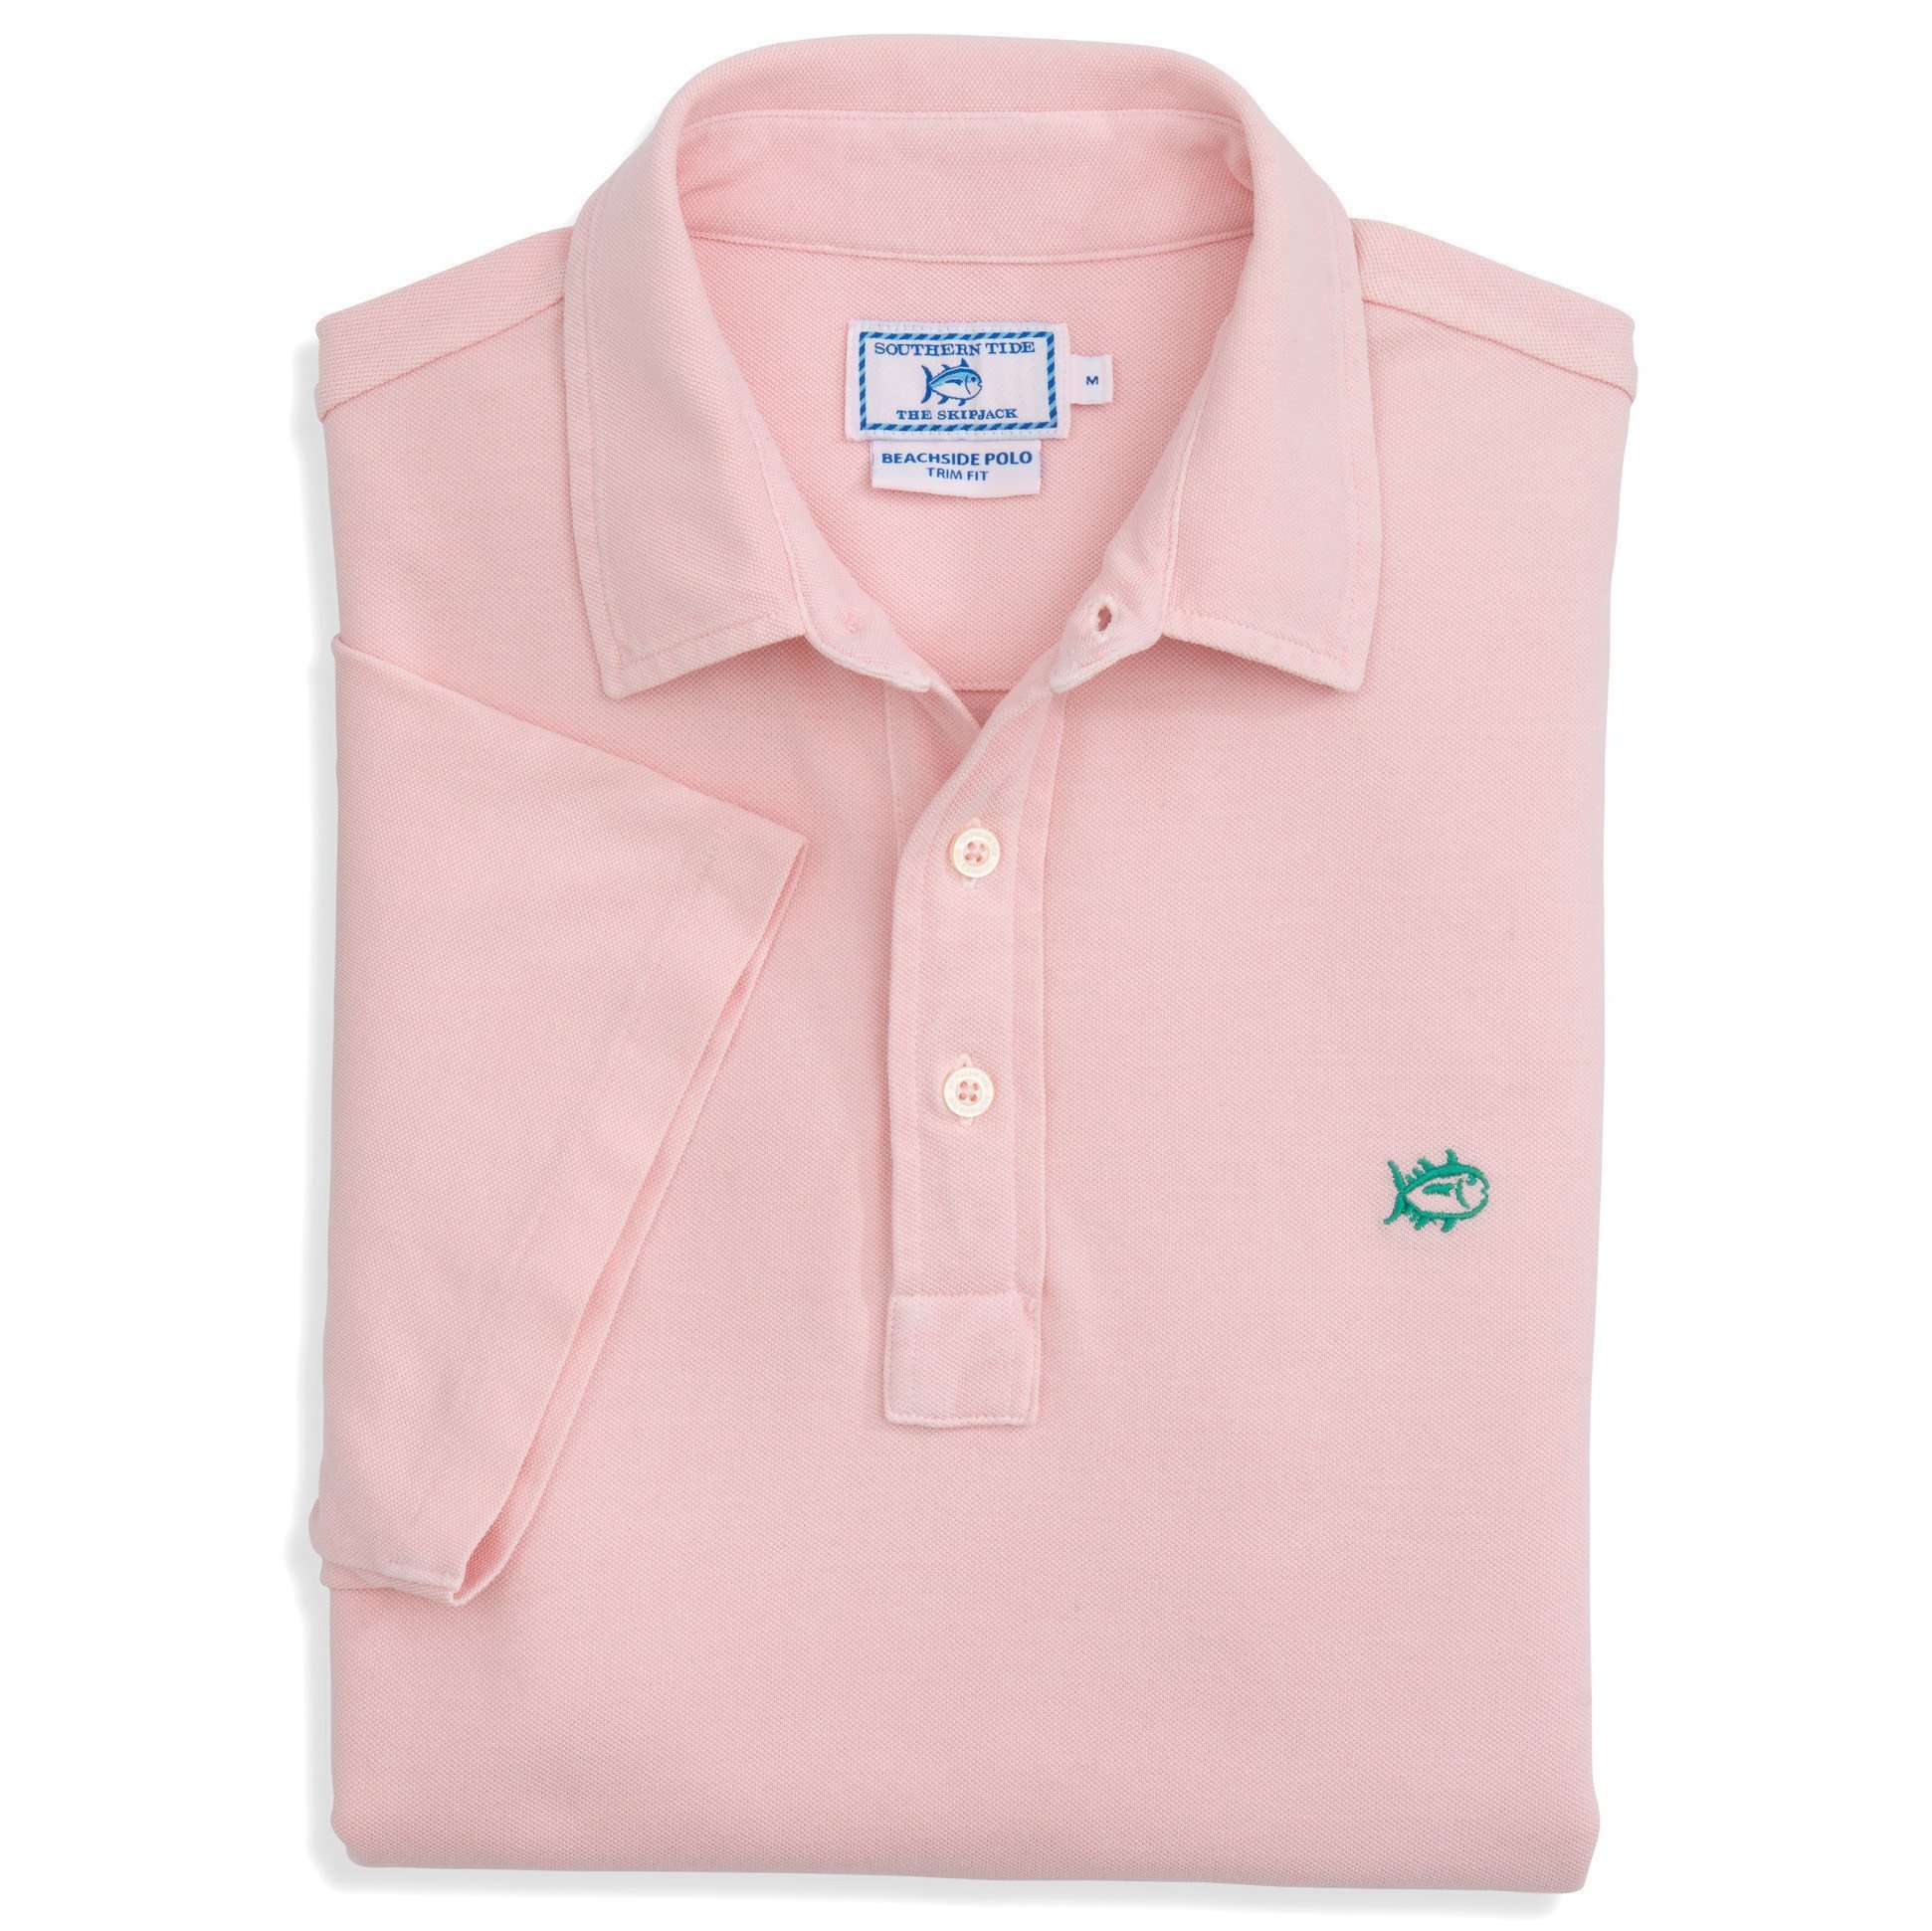 Short Sleeve Beachside Polo in Light Pink by Southern Tide - Country Club Prep